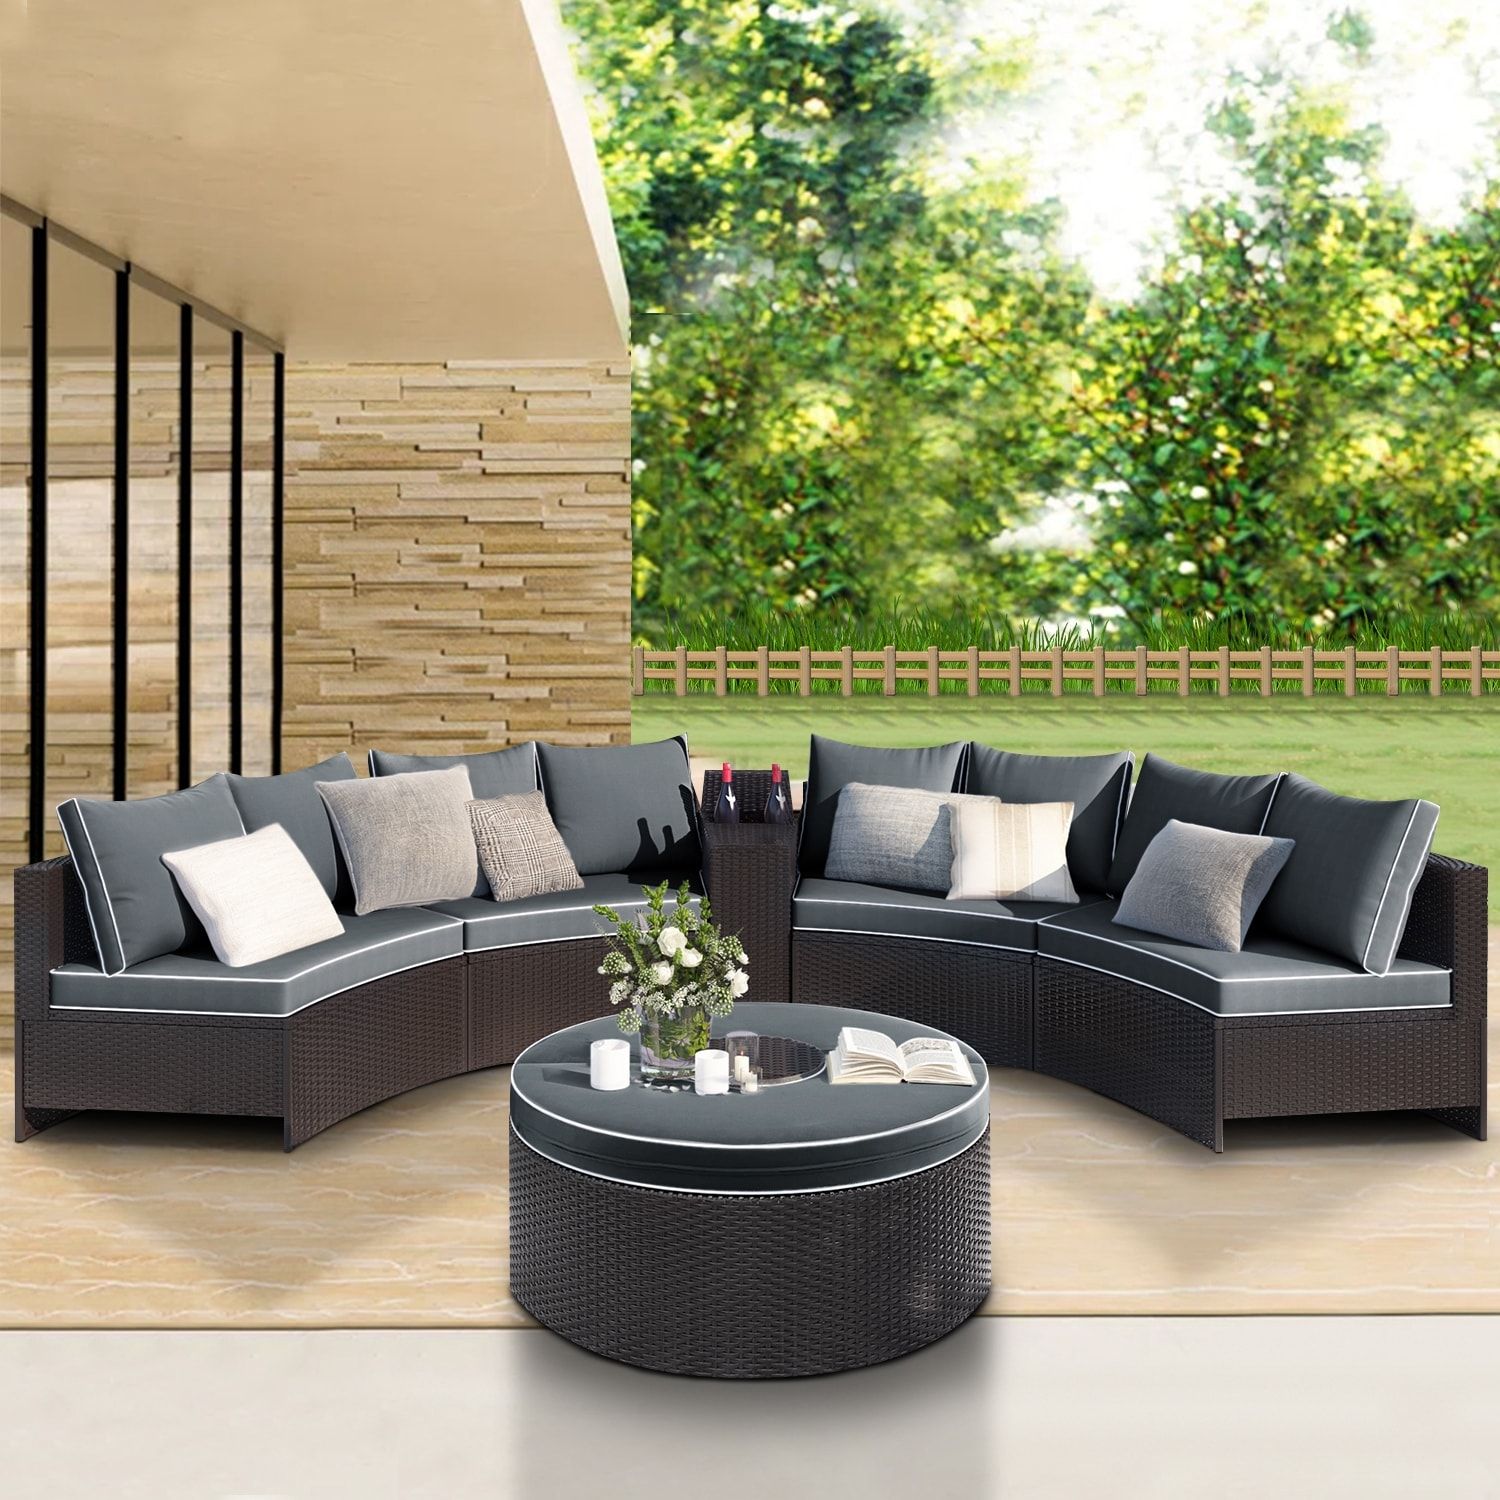 Maincraft 6 Pieces Outdoor Sectional Half Round Patio Rattan Sofa Set, Pe  Wicker Conversation Furniture Set W/ One Storage Side Table For Umbrella  And One Multifunctional Round Table, Brown+ Gray In The In Outdoor Half Round Coffee Tables (View 9 of 15)